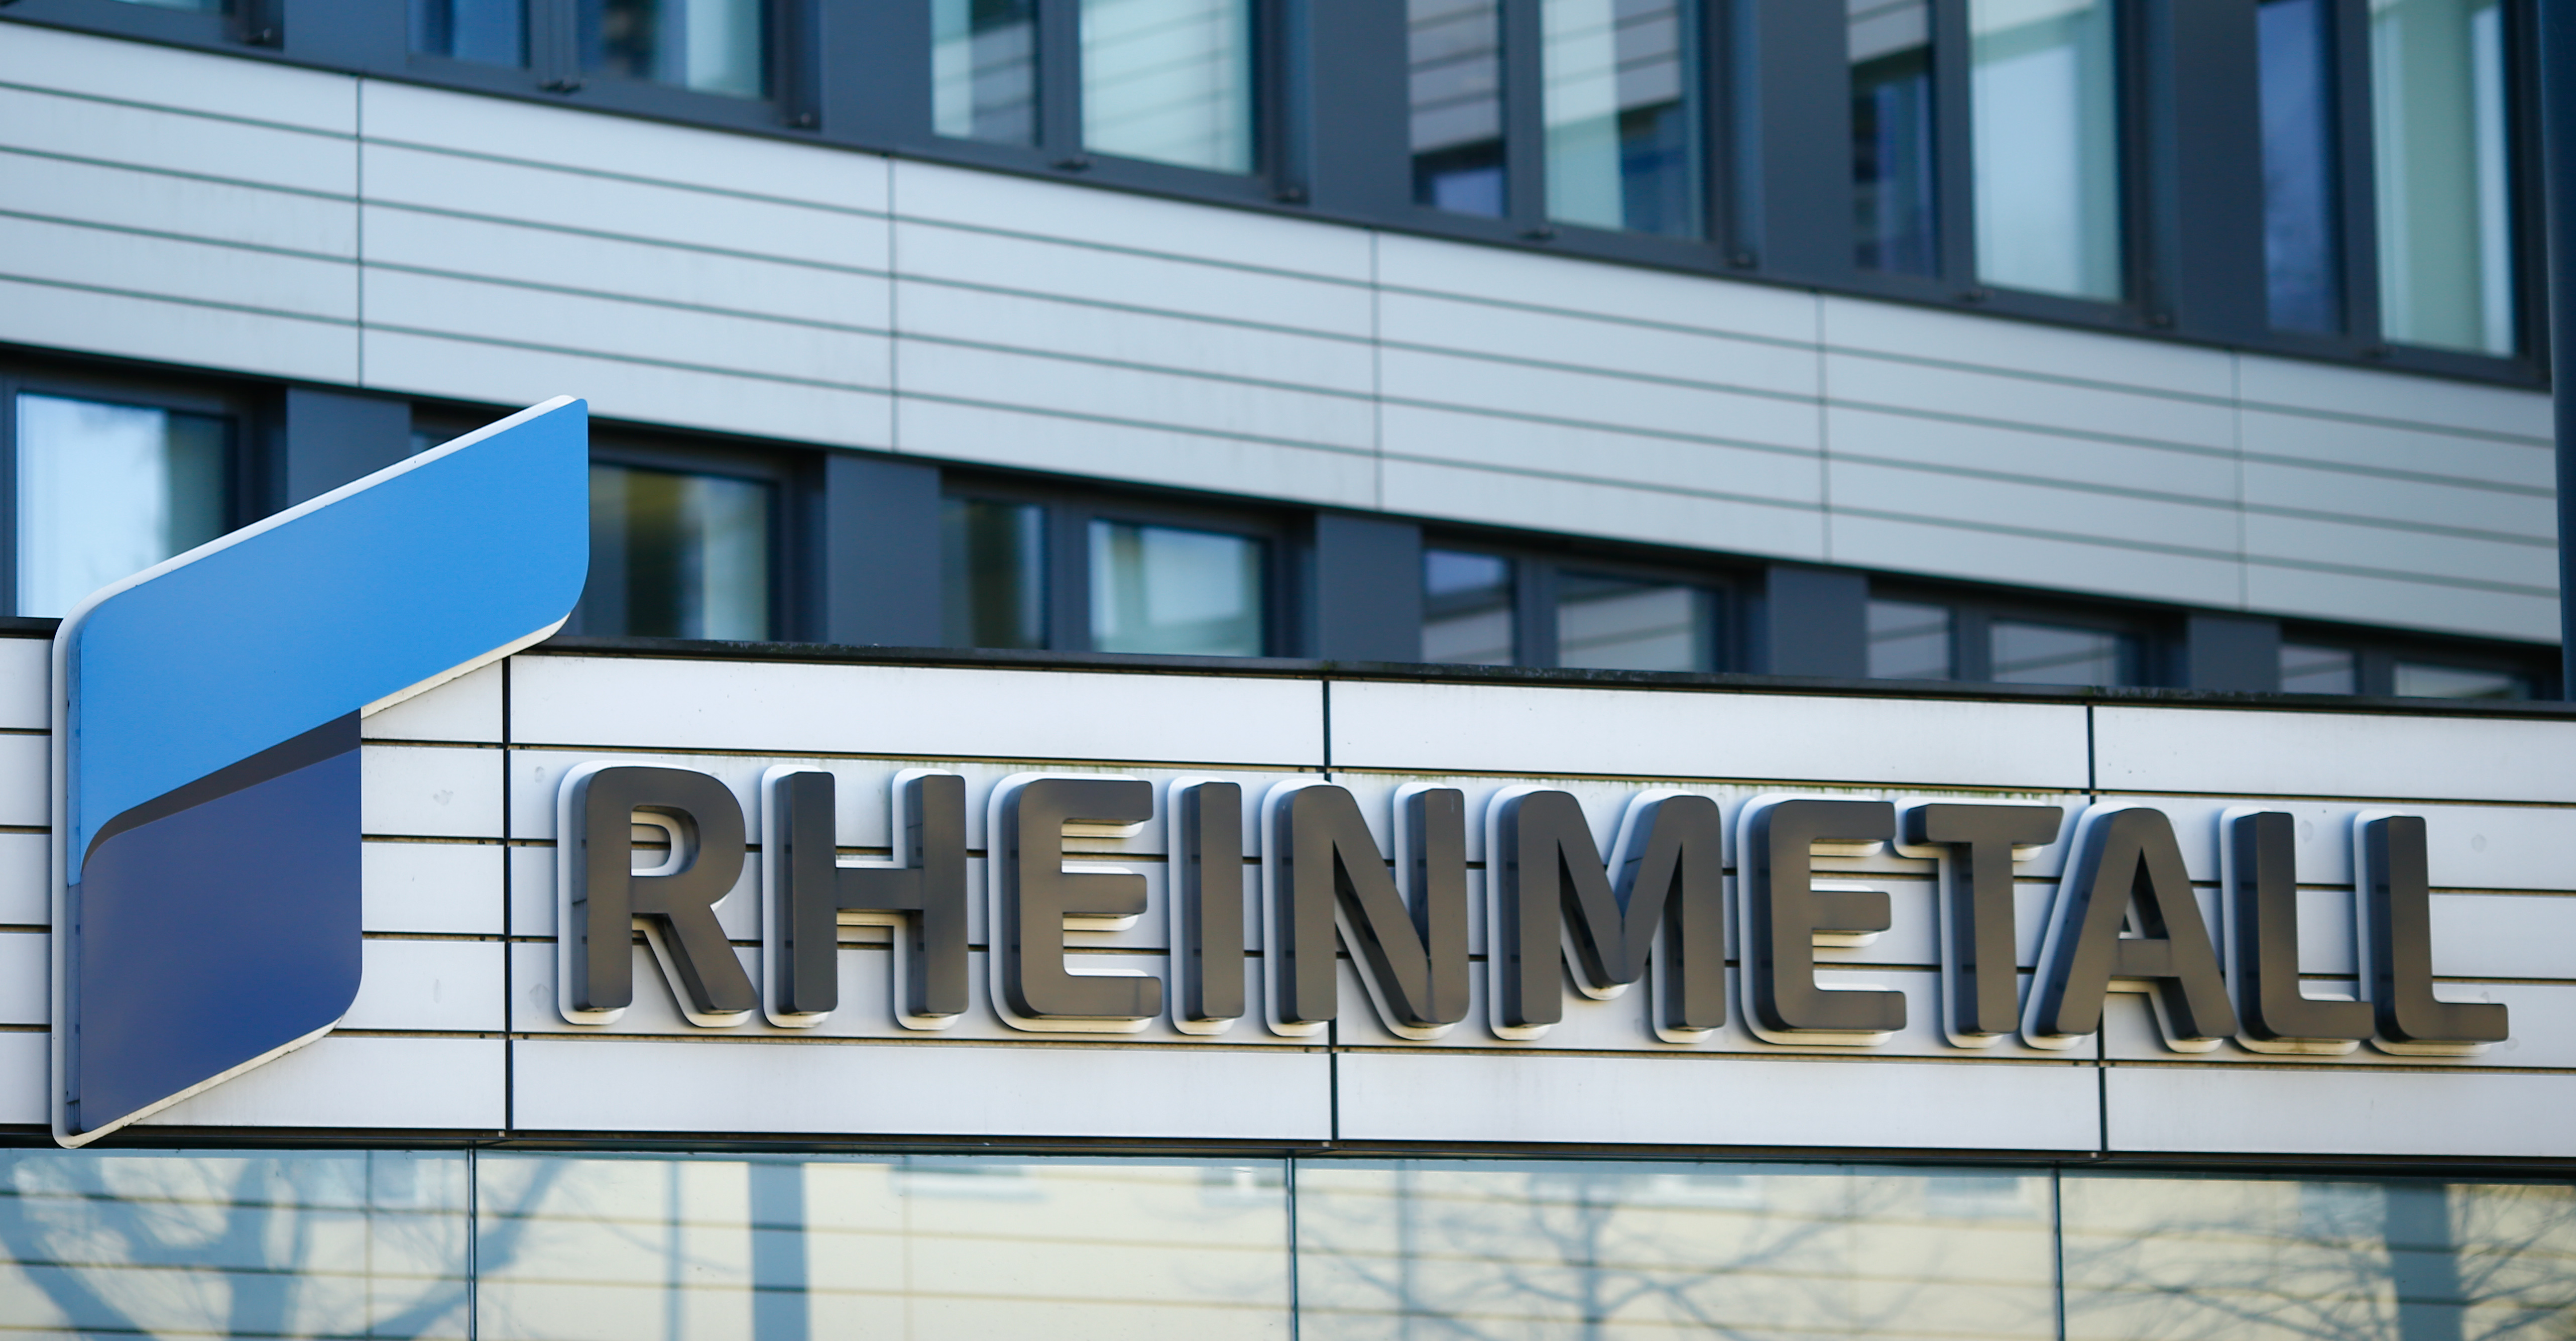 The logo of Germany's Rheinmetall AG is seen after the Company's 2019 annual report in Duesseldorf